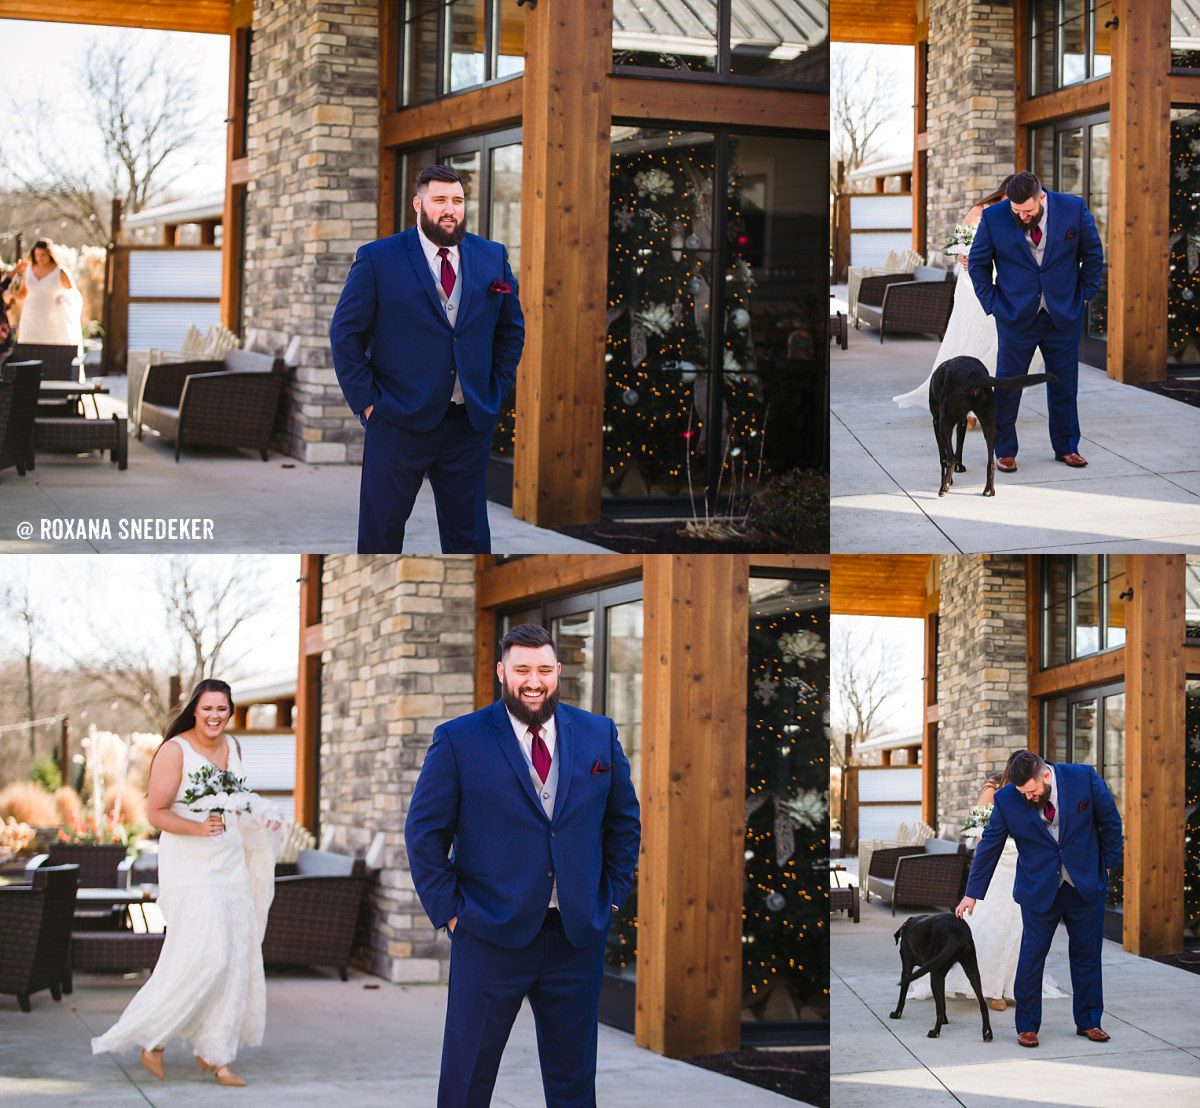 Carmel, Noblesville, Anderson, Muncie, Fishers, Westfield Indianapolis wedding photographer